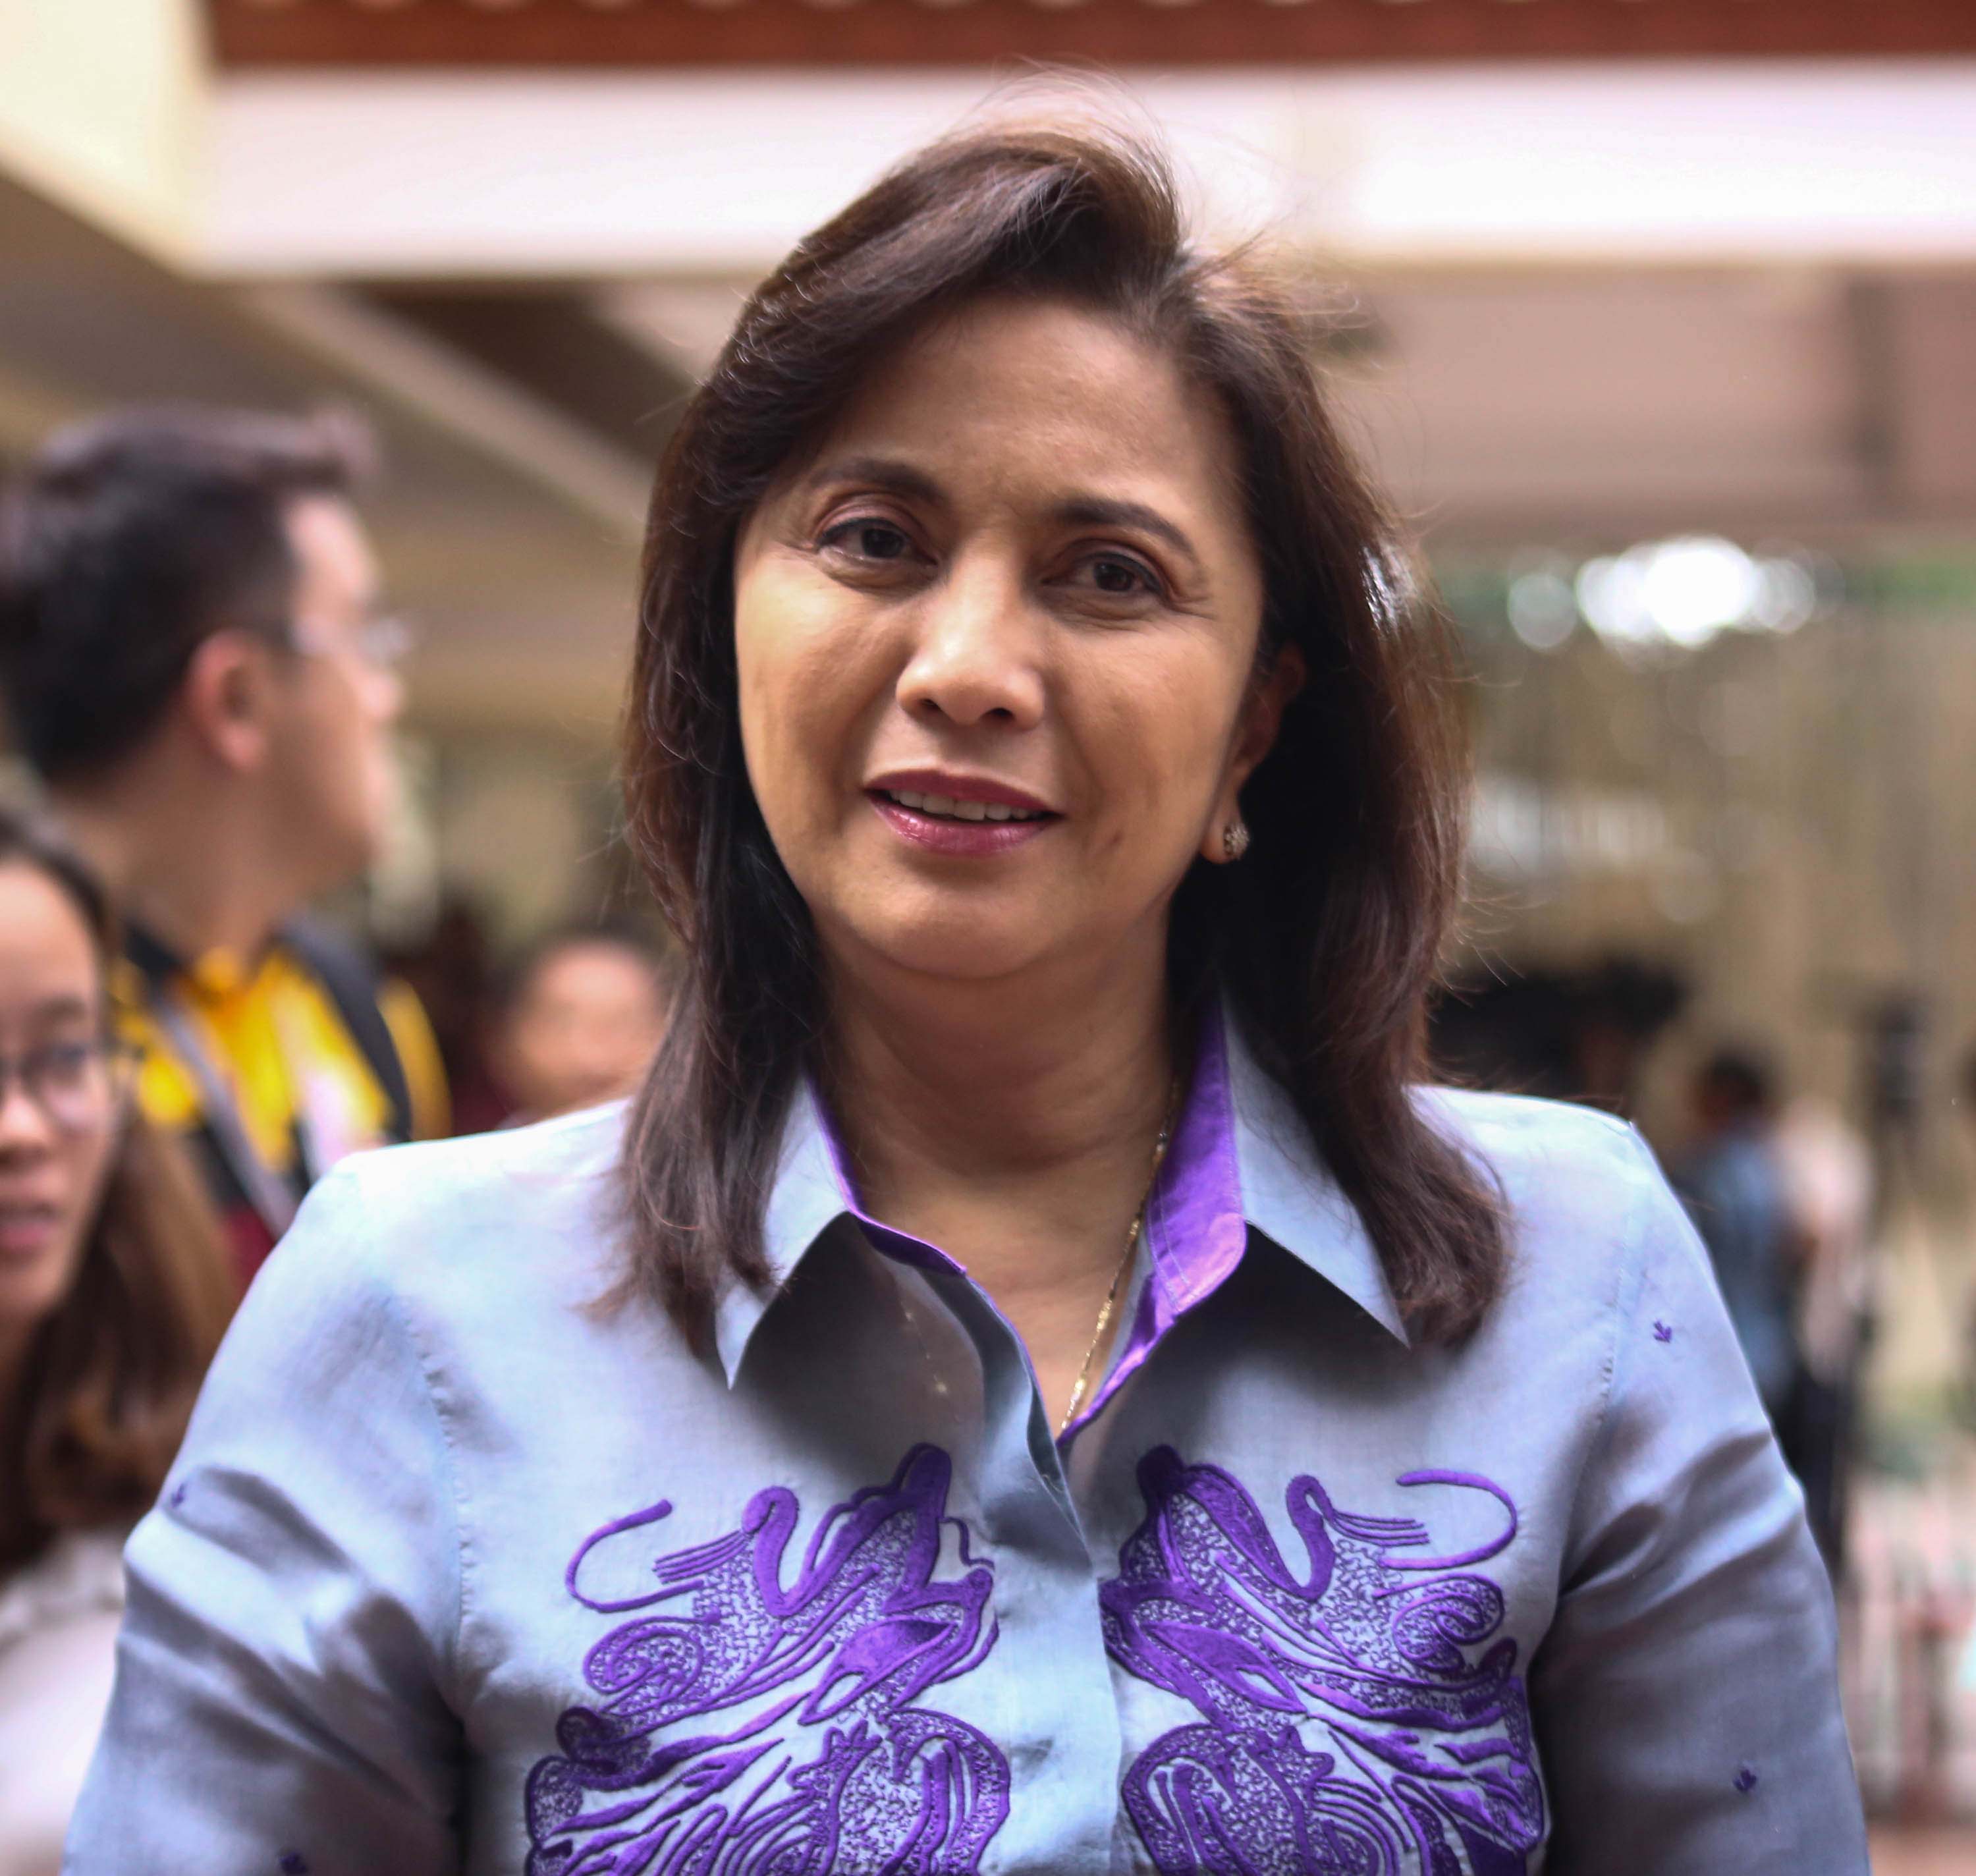 Robredo on 2022 presidential poll: Thinking about it now is ‘useless’